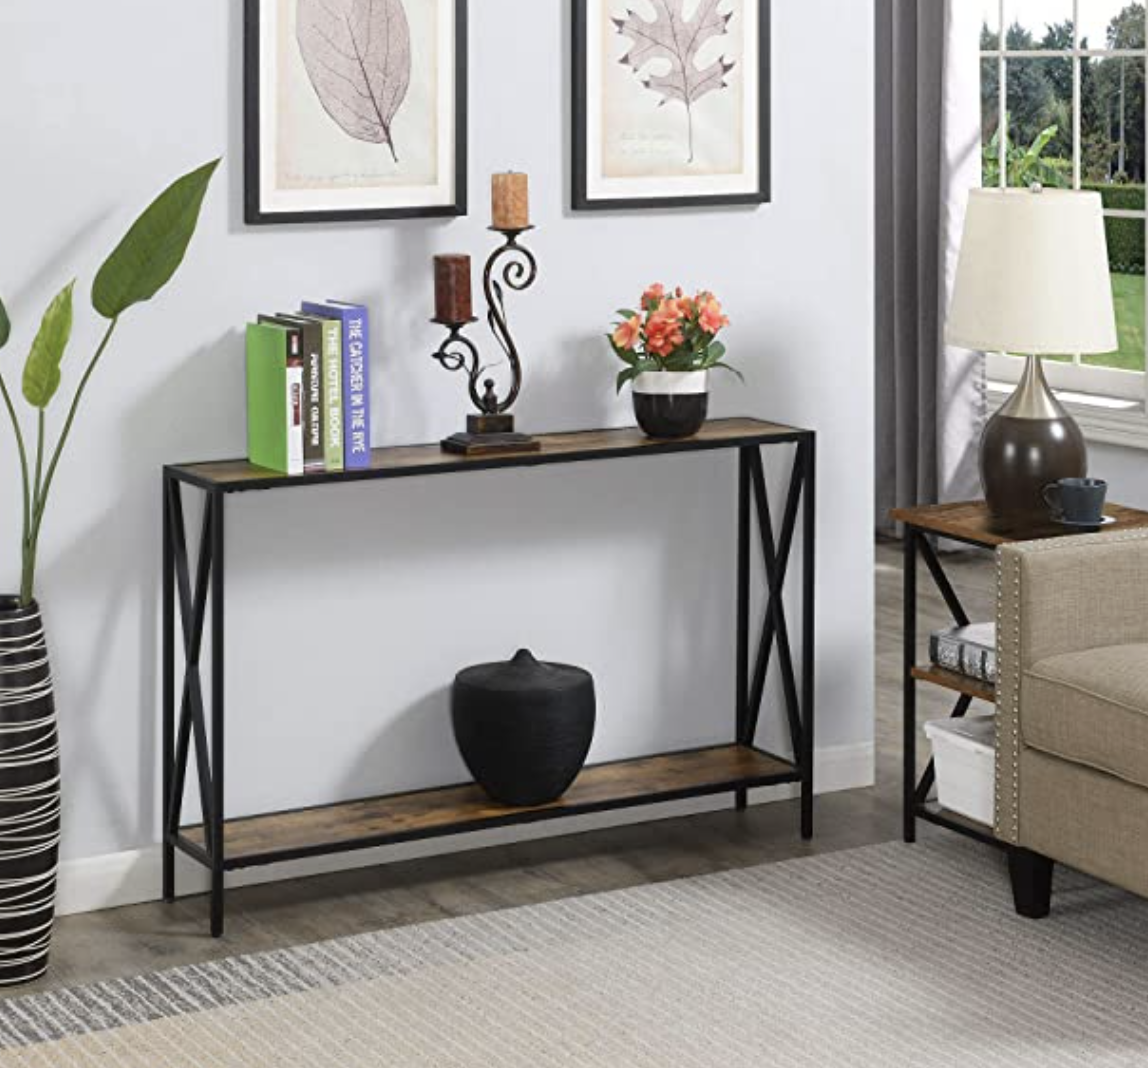 The wooden brown and black console table